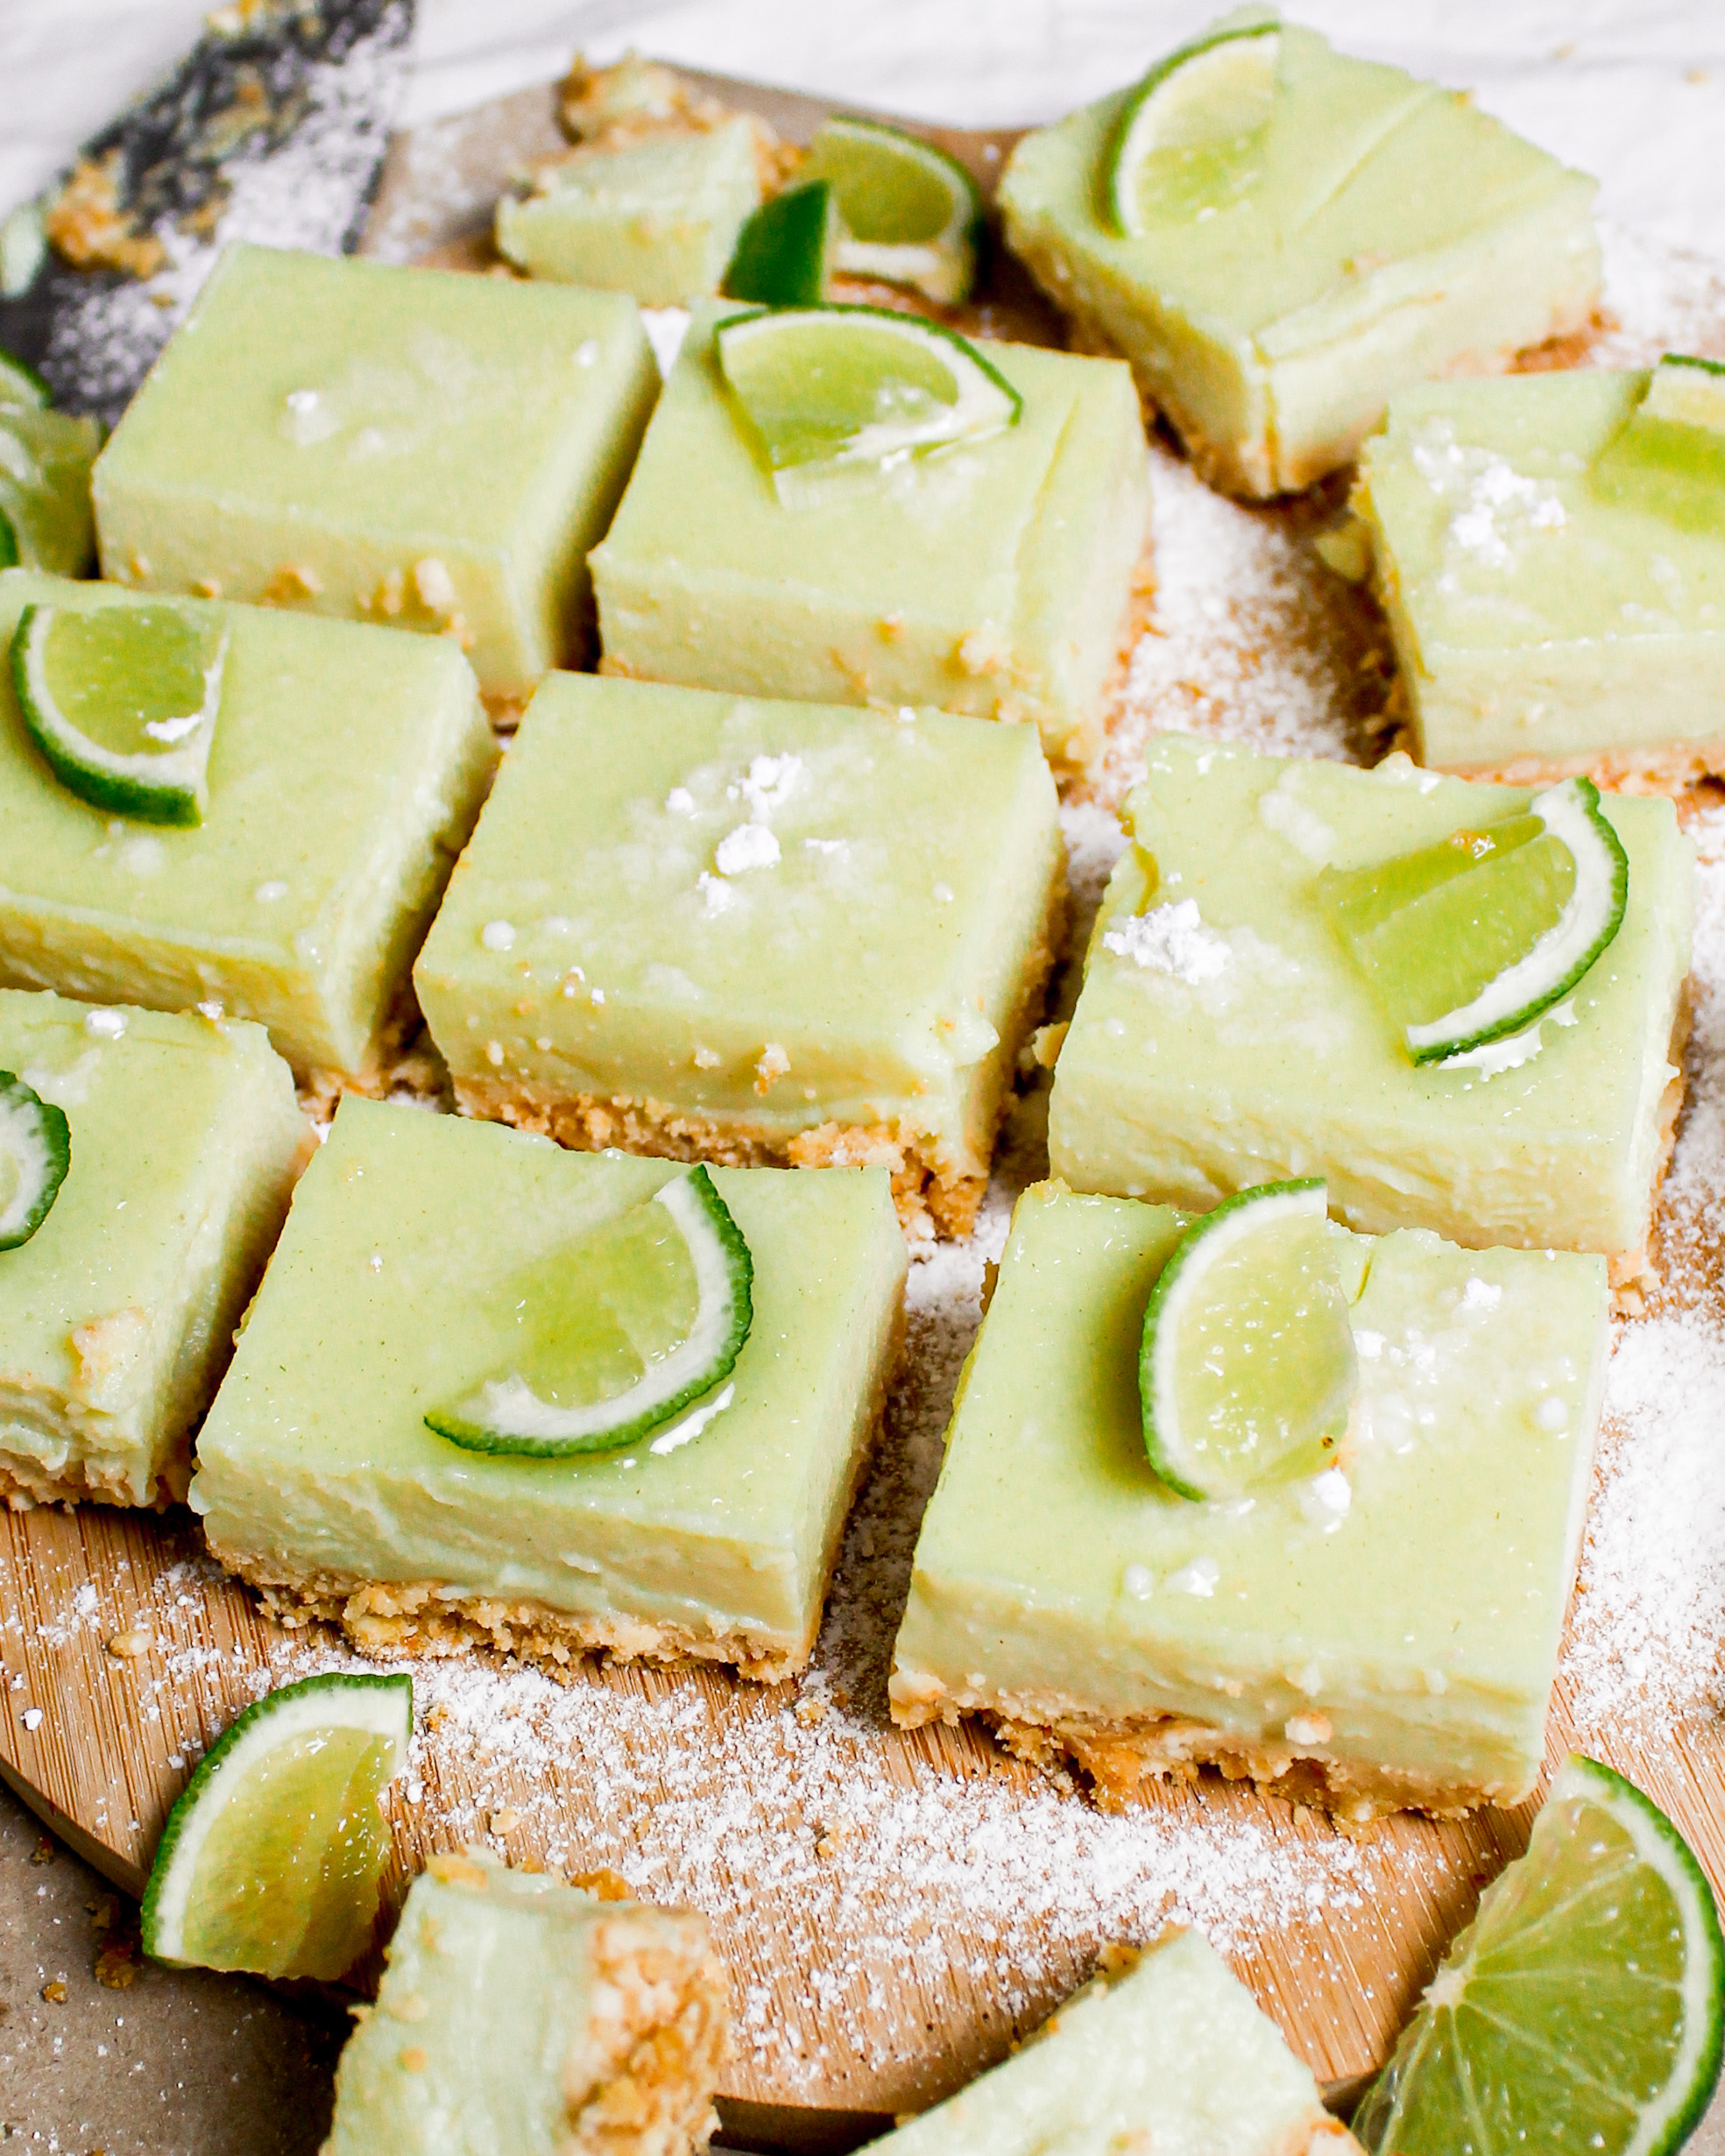 Lime Bars Without Condensed Milk
